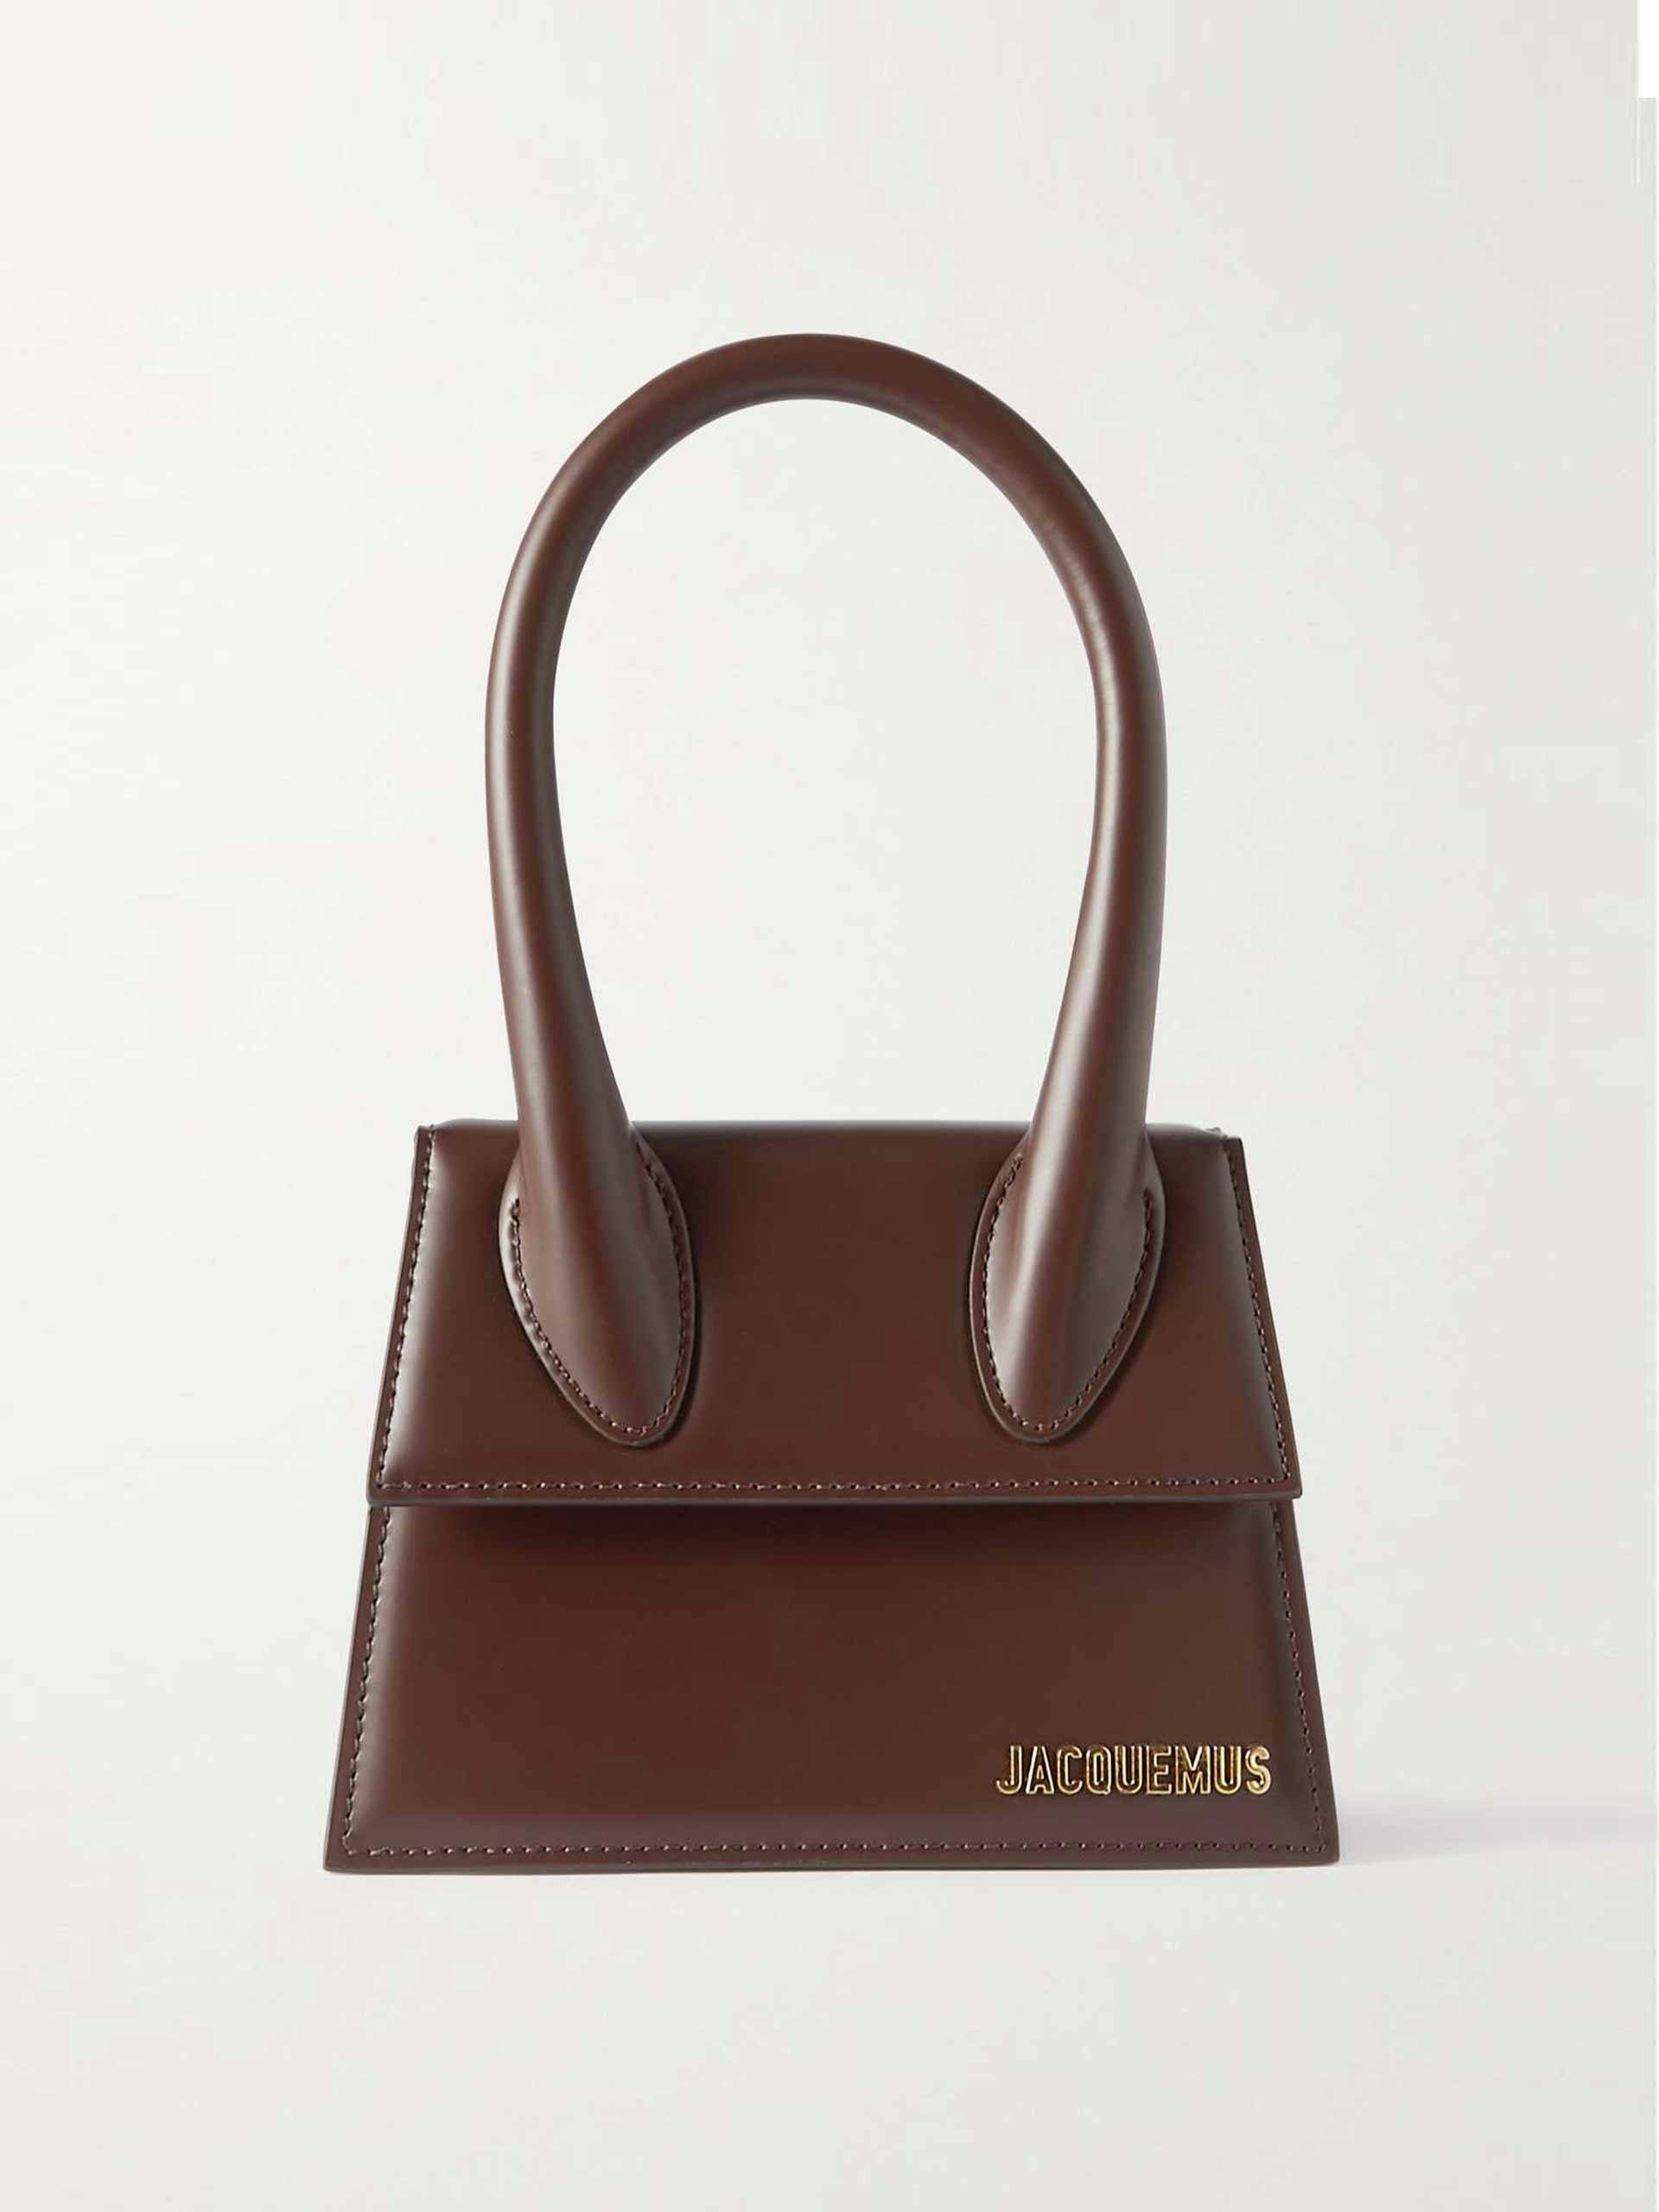 Le Chiquito brown leather tote